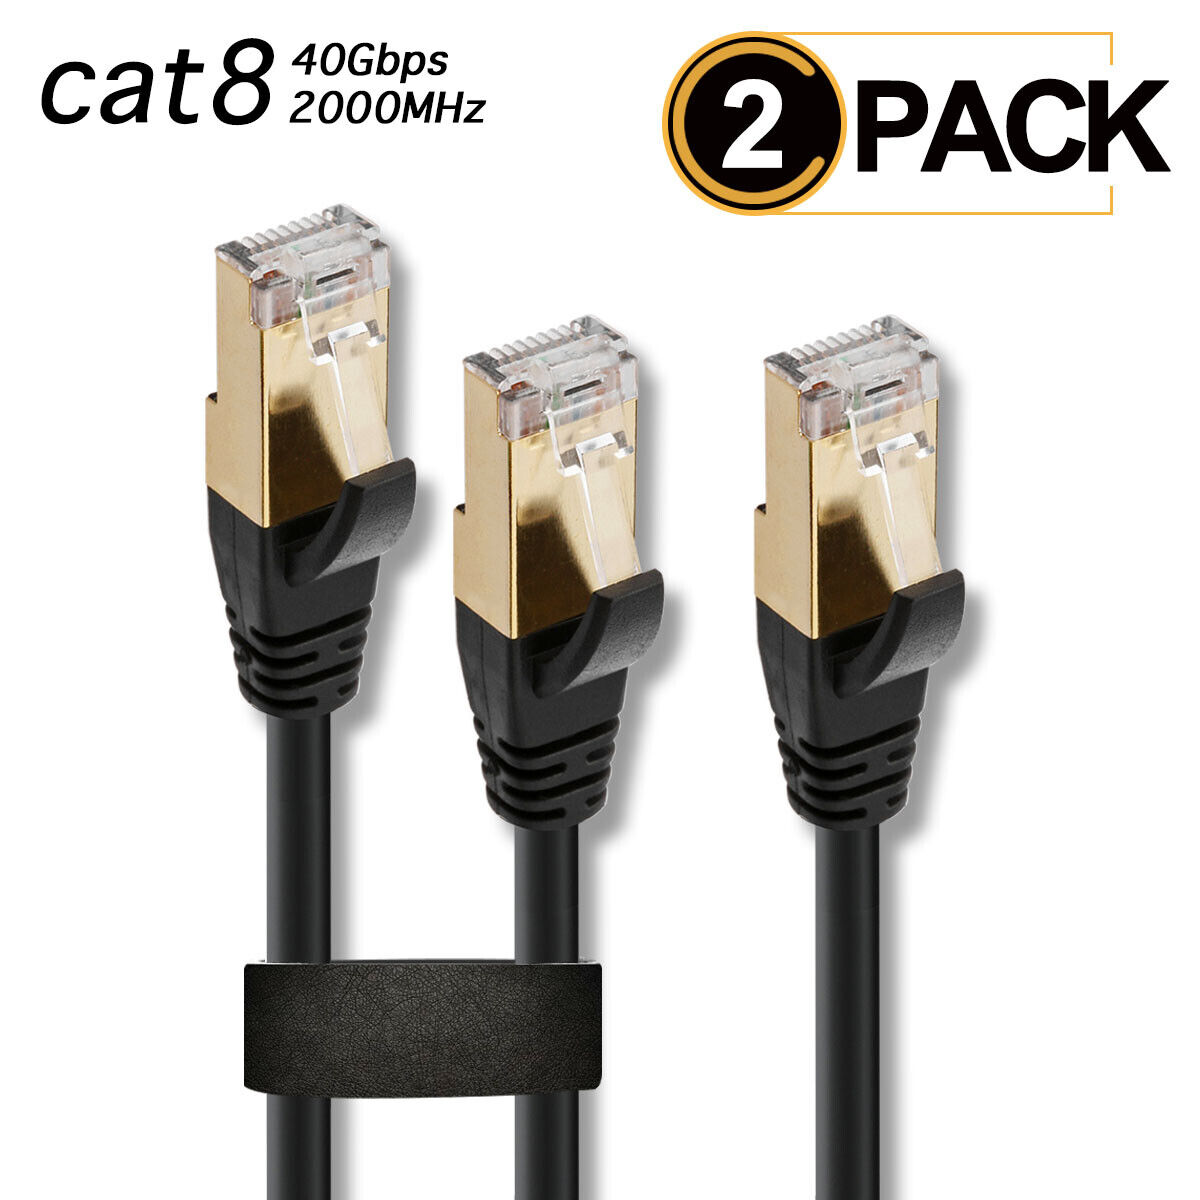 2 x High Speed Cat8 Cat 8 Internet WiFi Cable w/ Gold Plated RJ45 Connector Lot